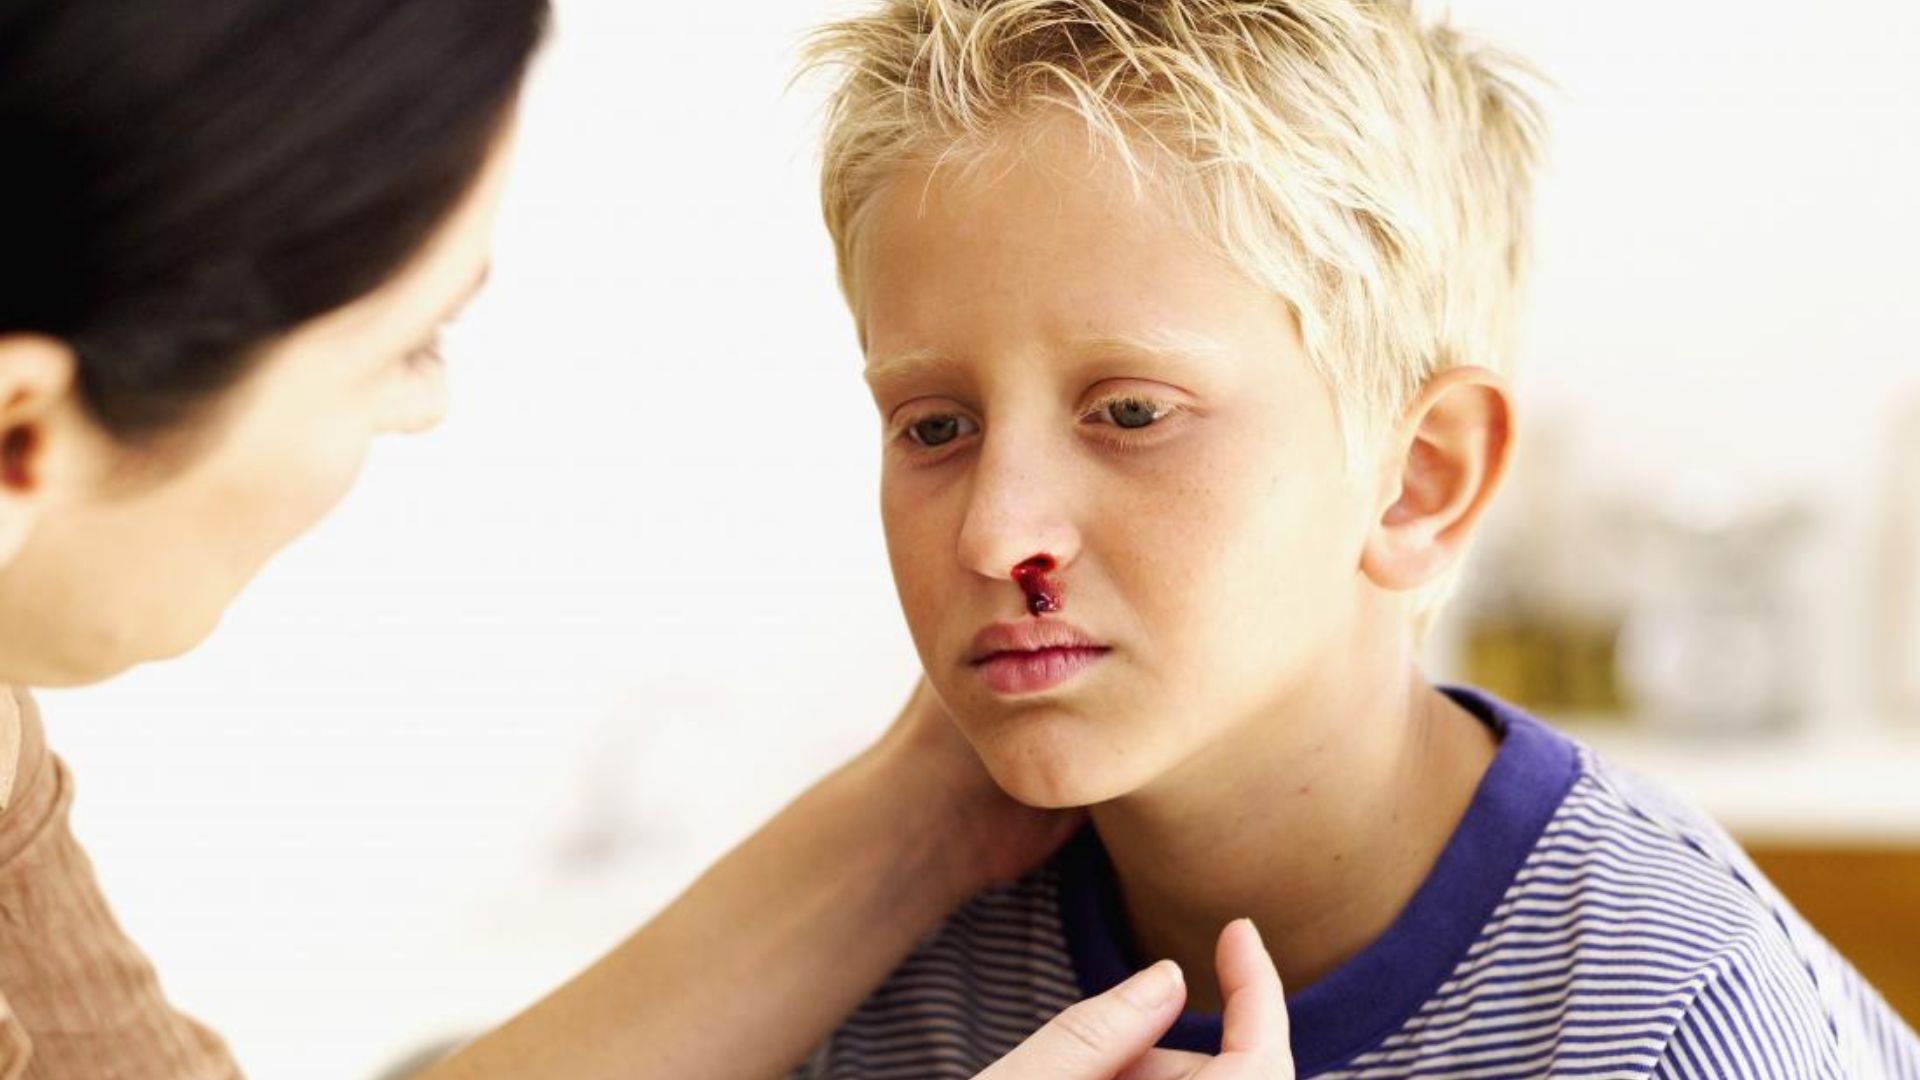 Boy With Golden Hair And Bleeding Nose